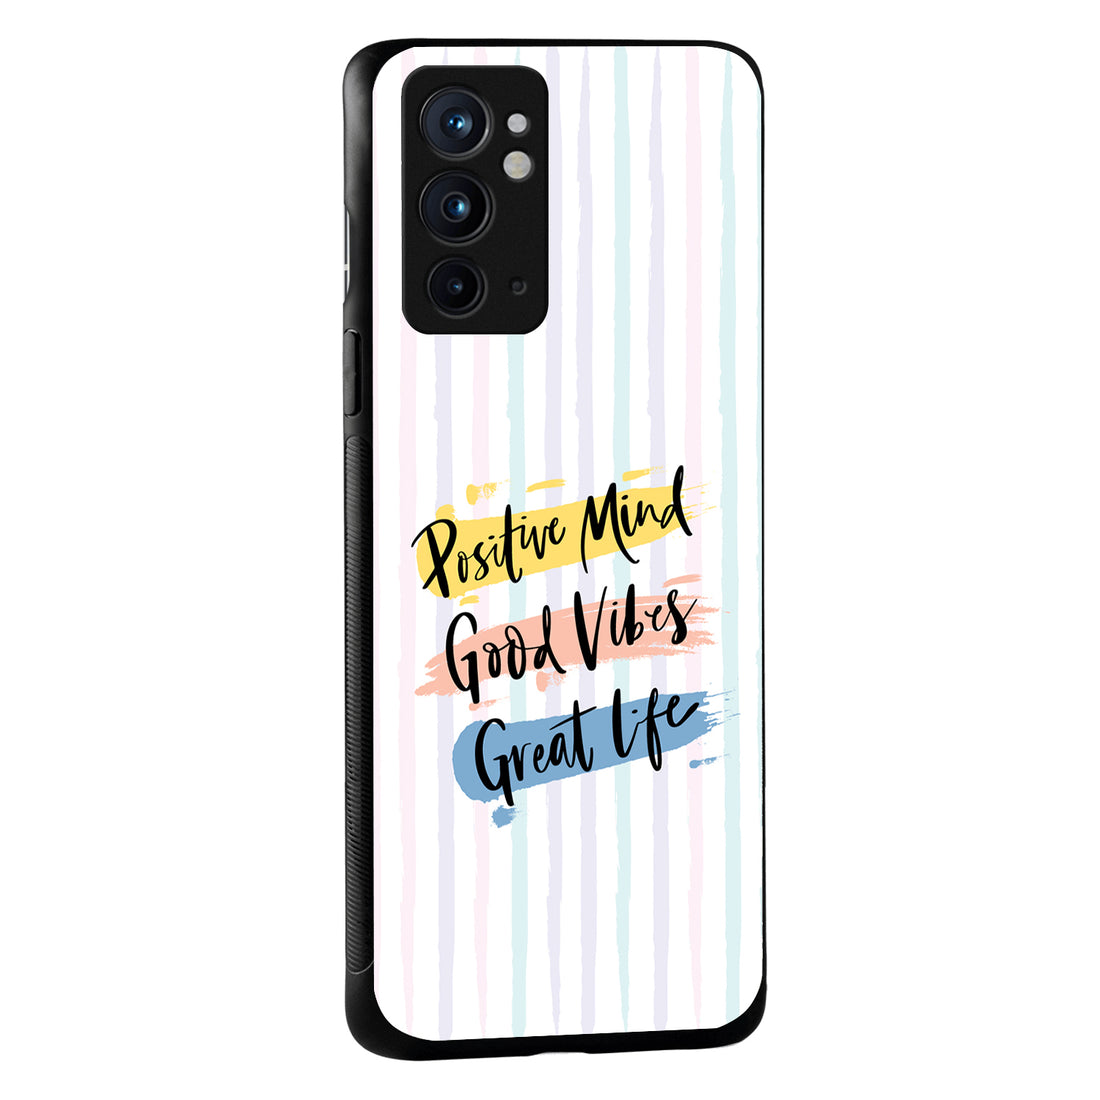 Great Life Motivational Quotes OnePlus 9 RT Back Case